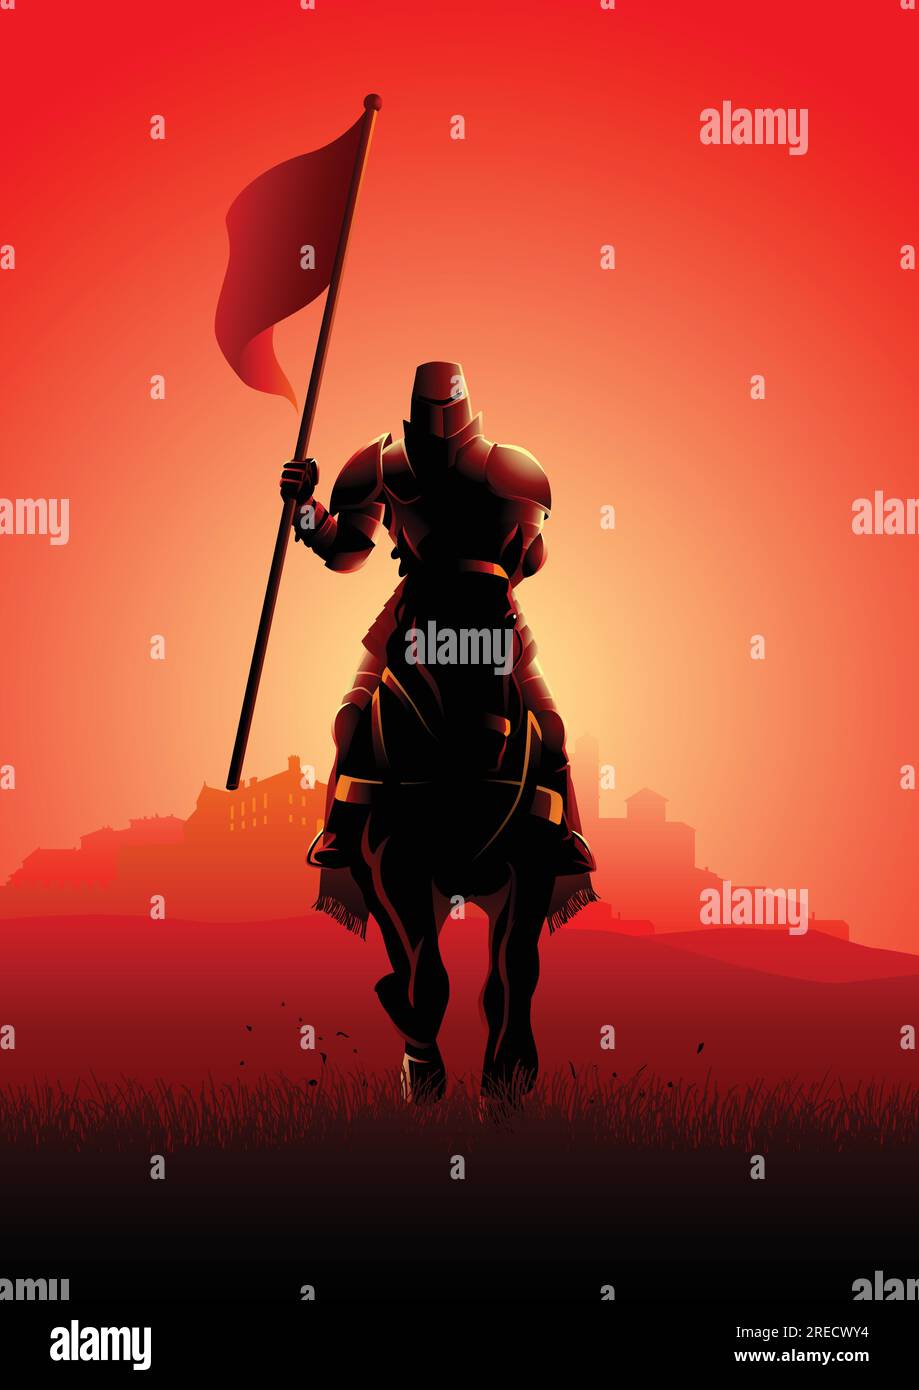 Vector illustration of a medieval knight on horse carrying a flag on dramatic scene Stock Vector